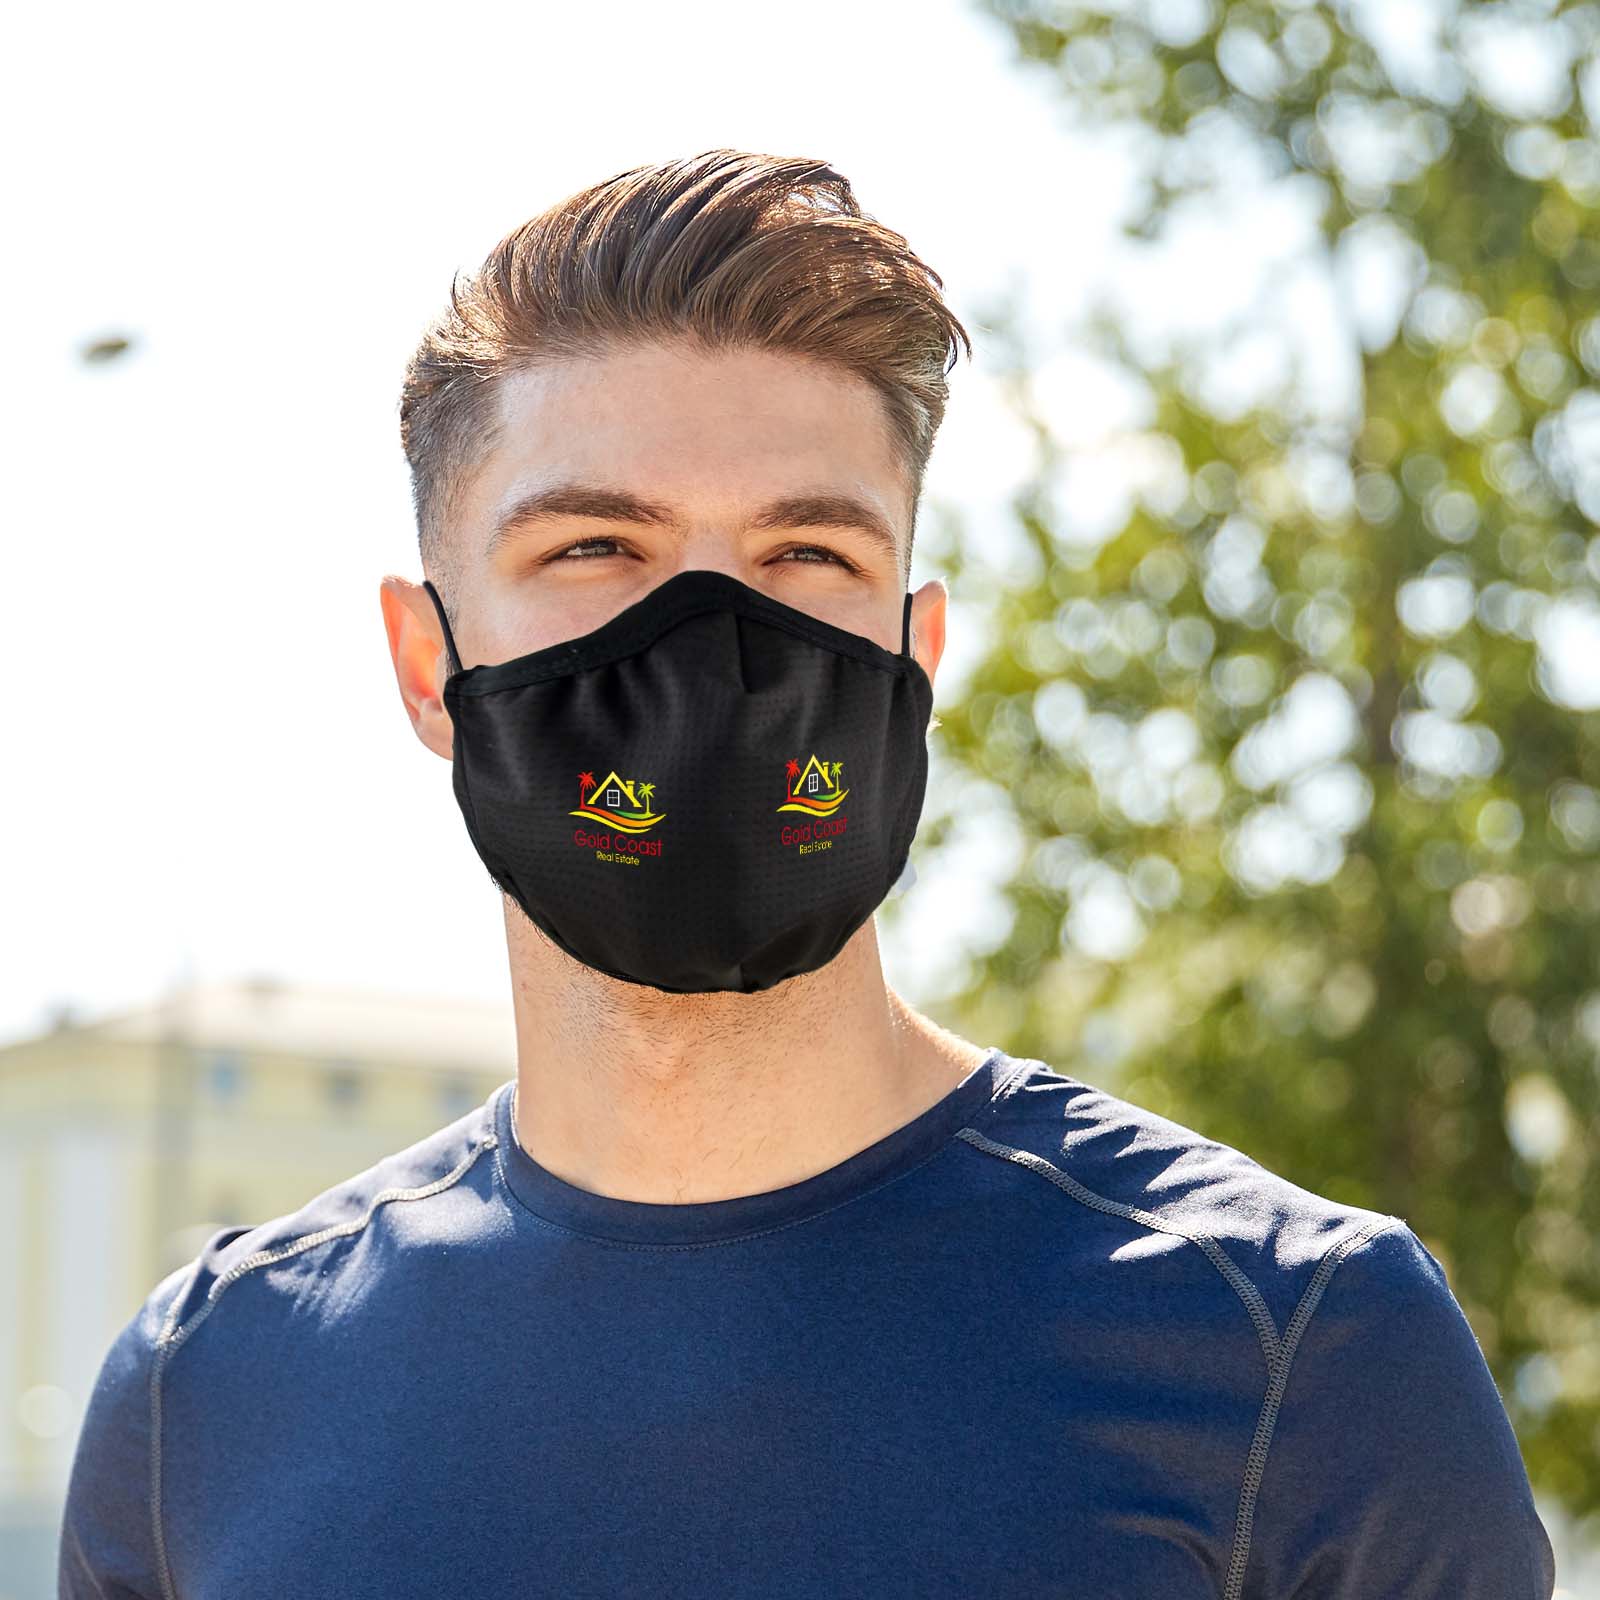 Cooling Face Mask Features